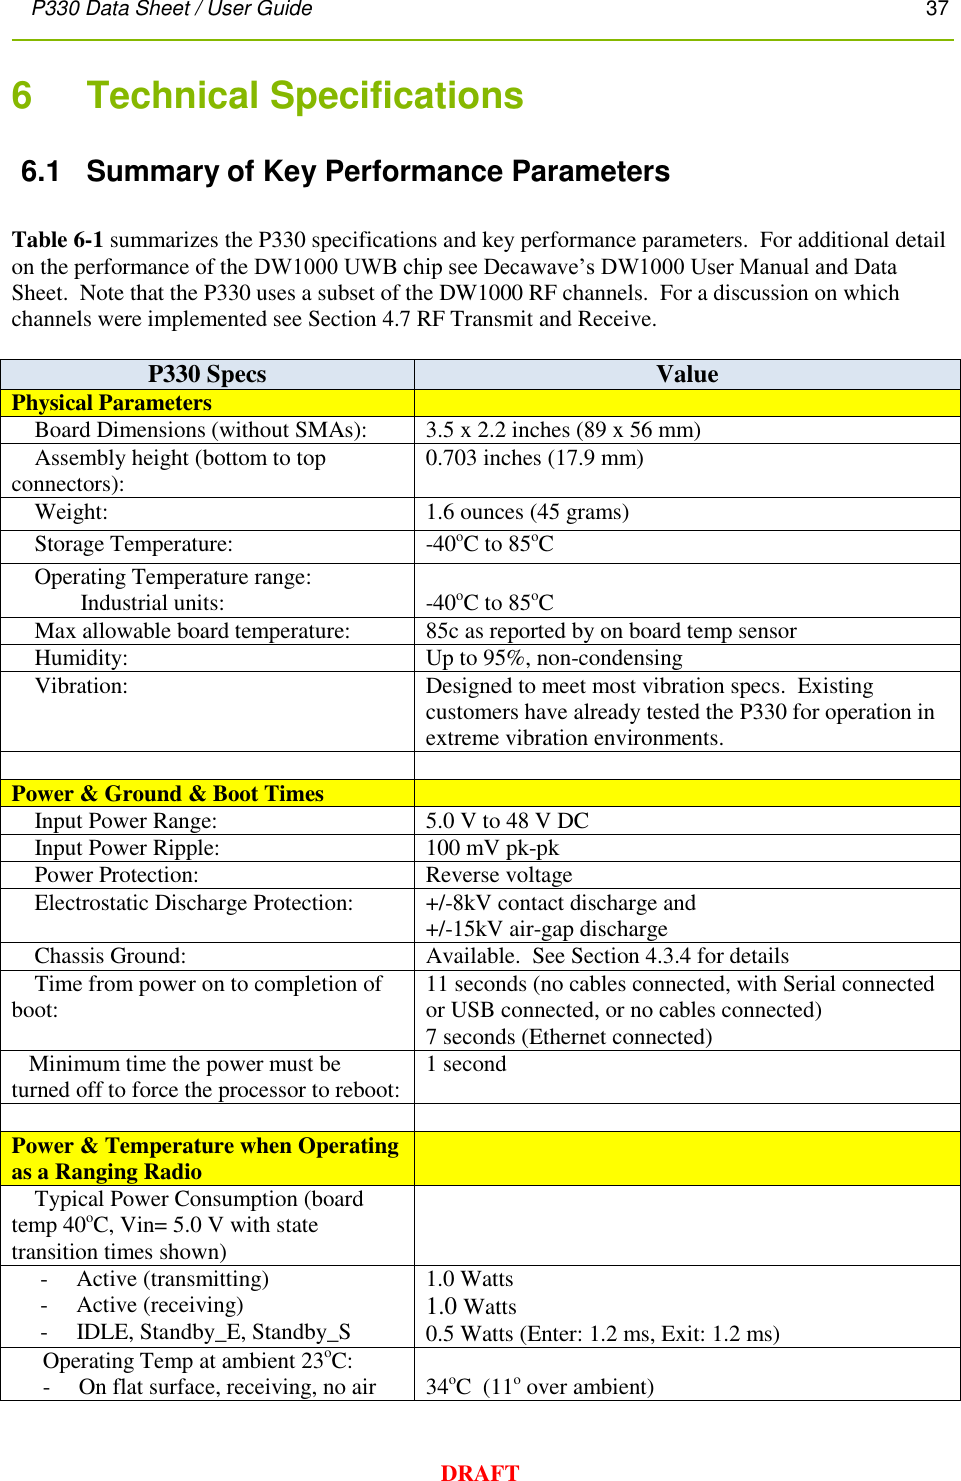 P330 Data Sheet / User Guide       37        DRAFT 6    Technical Specifications 6.1  Summary of Key Performance Parameters  Table 6-1 summarizes the P330 specifications and key performance parameters.  For additional detail on the performance of the DW1000 UWB chip see Decawave’s DW1000 User Manual and Data Sheet.  Note that the P330 uses a subset of the DW1000 RF channels.  For a discussion on which channels were implemented see Section 4.7 RF Transmit and Receive.  P330 Specs Value Physical Parameters      Board Dimensions (without SMAs): 3.5 x 2.2 inches (89 x 56 mm)     Assembly height (bottom to top connectors): 0.703 inches (17.9 mm)     Weight: 1.6 ounces (45 grams)      Storage Temperature: -40oC to 85oC       Operating Temperature range:                   Industrial units:       -40oC to 85oC      Max allowable board temperature: 85c as reported by on board temp sensor     Humidity: Up to 95%, non-condensing     Vibration: Designed to meet most vibration specs.  Existing customers have already tested the P330 for operation in extreme vibration environments.   Power &amp; Ground &amp; Boot Times      Input Power Range: 5.0 V to 48 V DC     Input Power Ripple: 100 mV pk-pk     Power Protection: Reverse voltage      Electrostatic Discharge Protection: +/-8kV contact discharge and +/-15kV air-gap discharge     Chassis Ground: Available.  See Section 4.3.4 for details     Time from power on to completion of boot: 11 seconds (no cables connected, with Serial connected or USB connected, or no cables connected) 7 seconds (Ethernet connected)    Minimum time the power must be turned off to force the processor to reboot: 1 second   Power &amp; Temperature when Operating as a Ranging Radio      Typical Power Consumption (board temp 40oC, Vin= 5.0 V with state transition times shown)       -     Active (transmitting)      -     Active (receiving)      -     IDLE, Standby_E, Standby_S 1.0 Watts  1.0 Watts 0.5 Watts (Enter: 1.2 ms, Exit: 1.2 ms) Operating Temp at ambient 23oC: -     On flat surface, receiving, no air  34oC  (11o over ambient) 